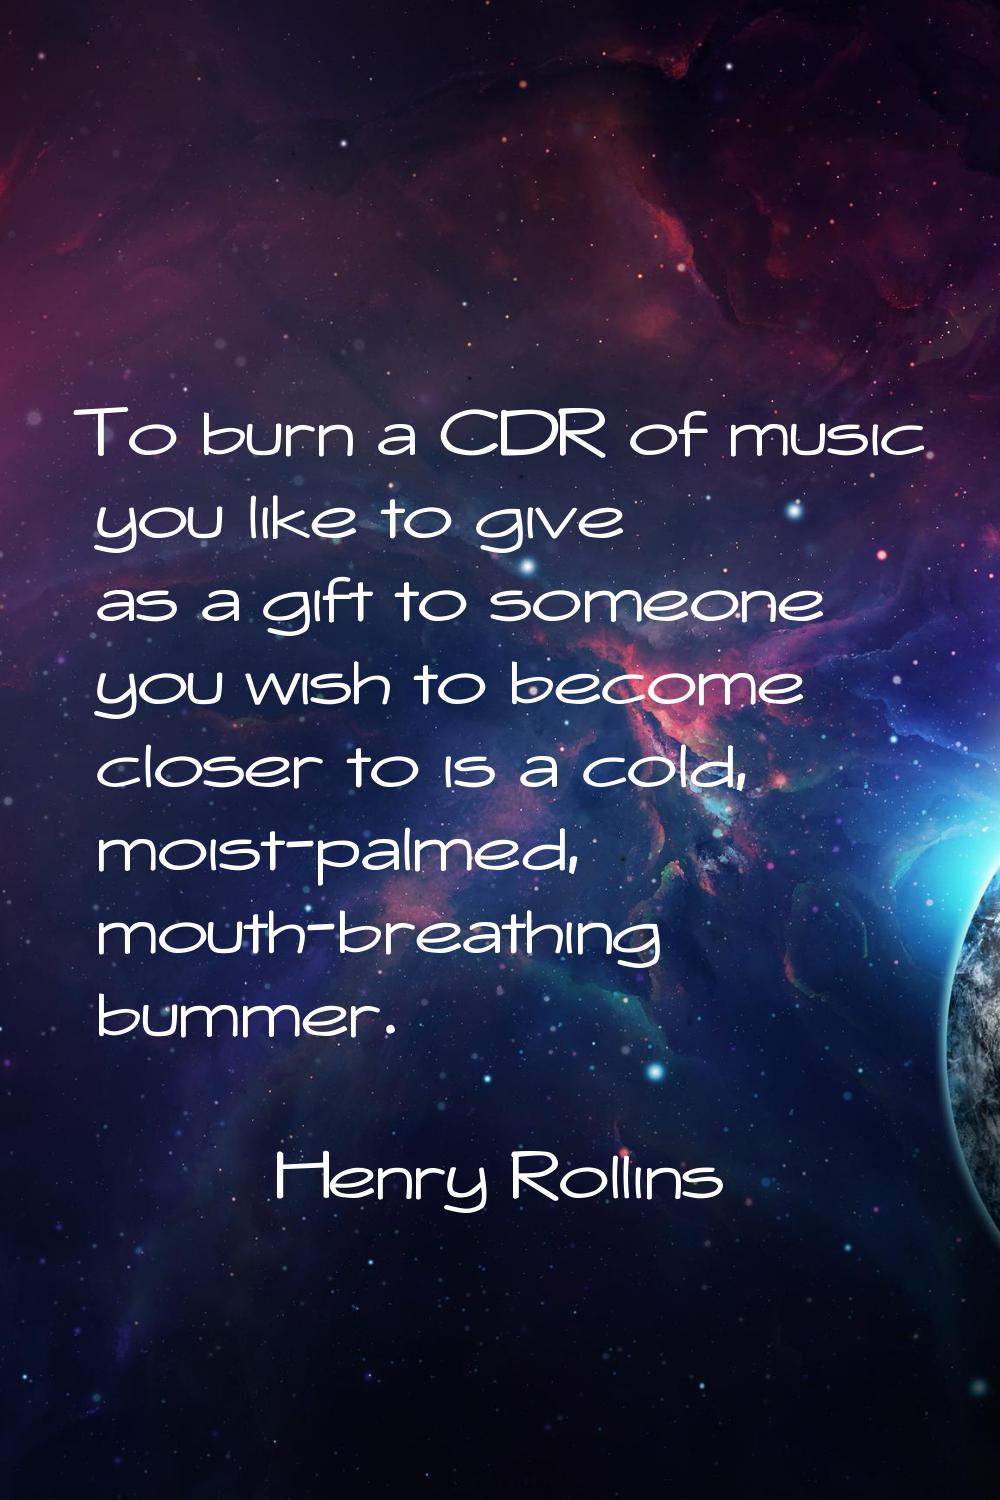 To burn a CDR of music you like to give as a gift to someone you wish to become closer to is a cold